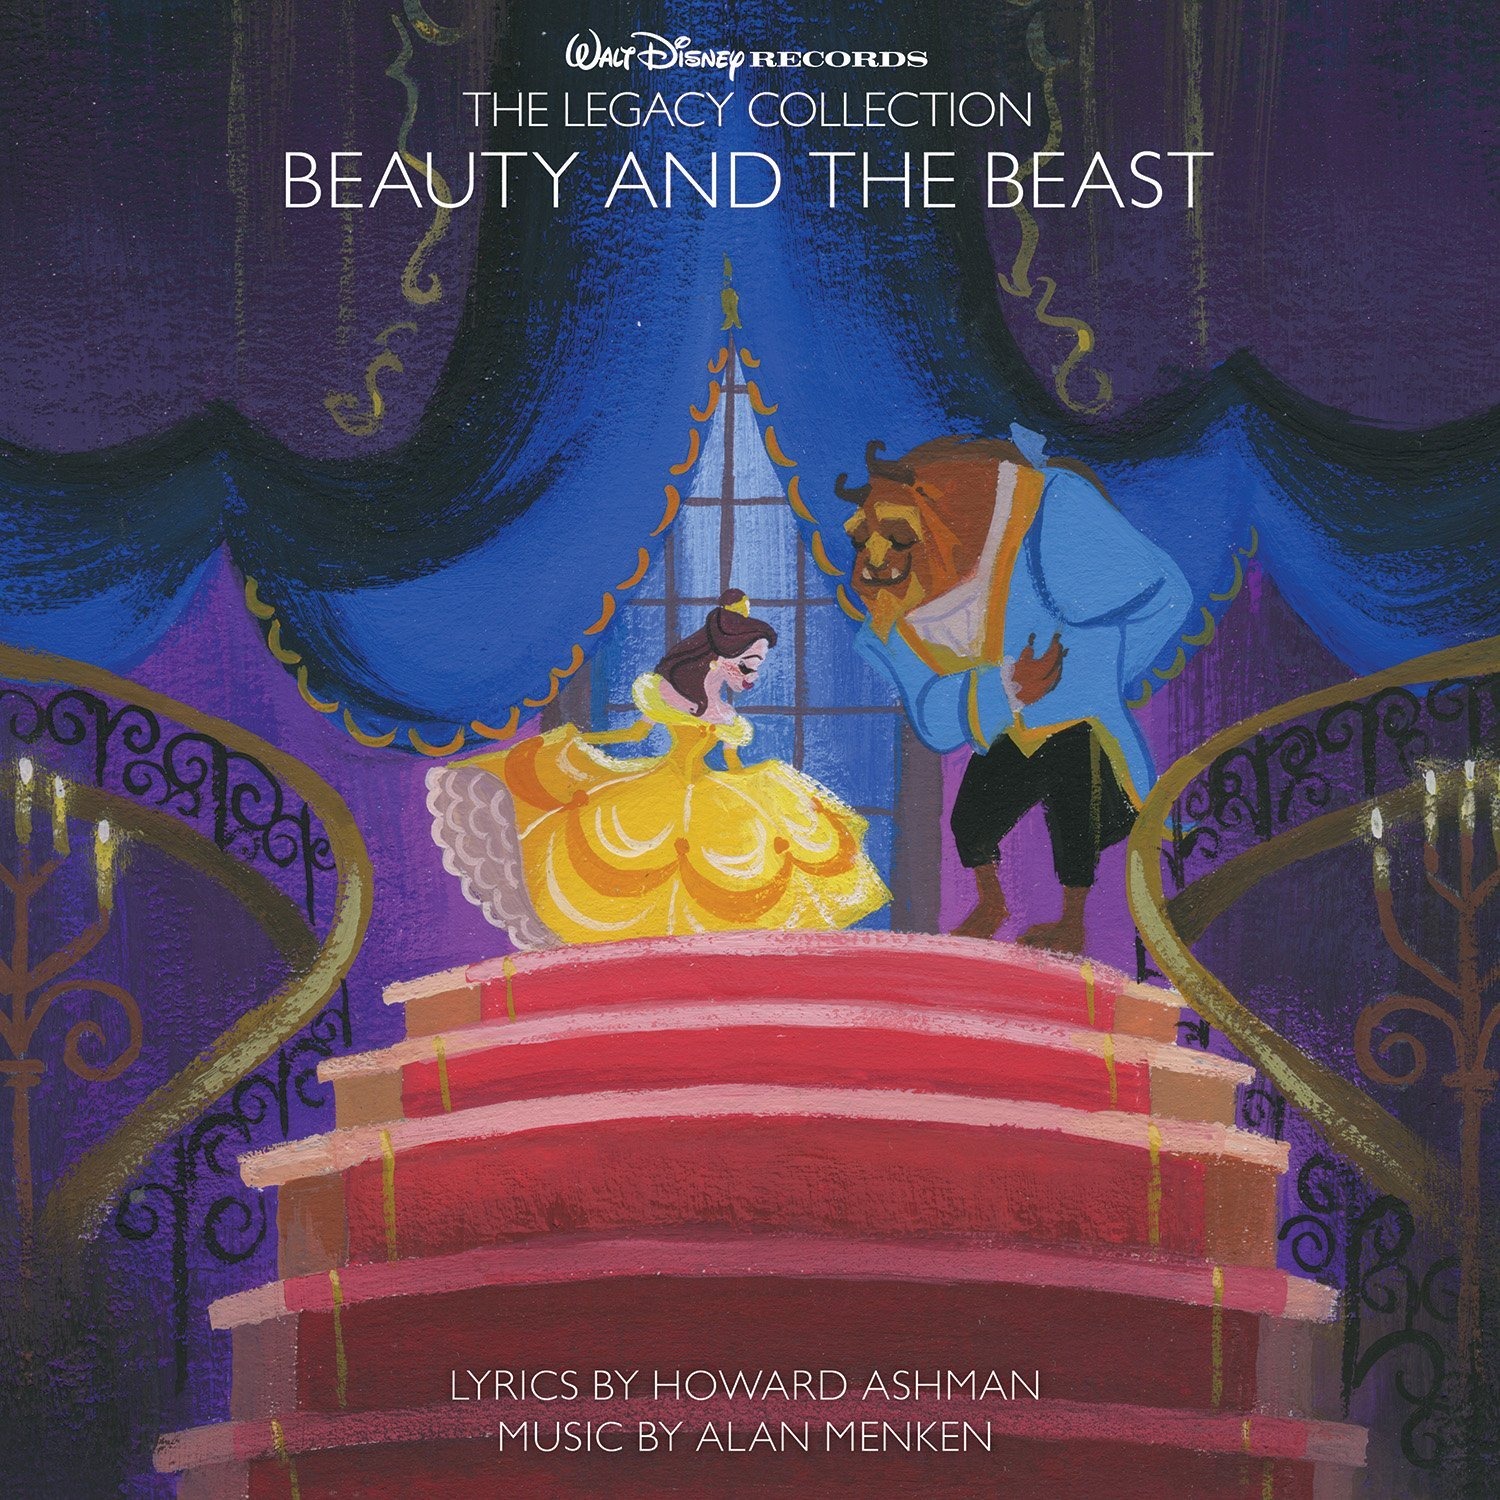 BEAUTY AND THE BEAST THE LEGACY COLLECTION